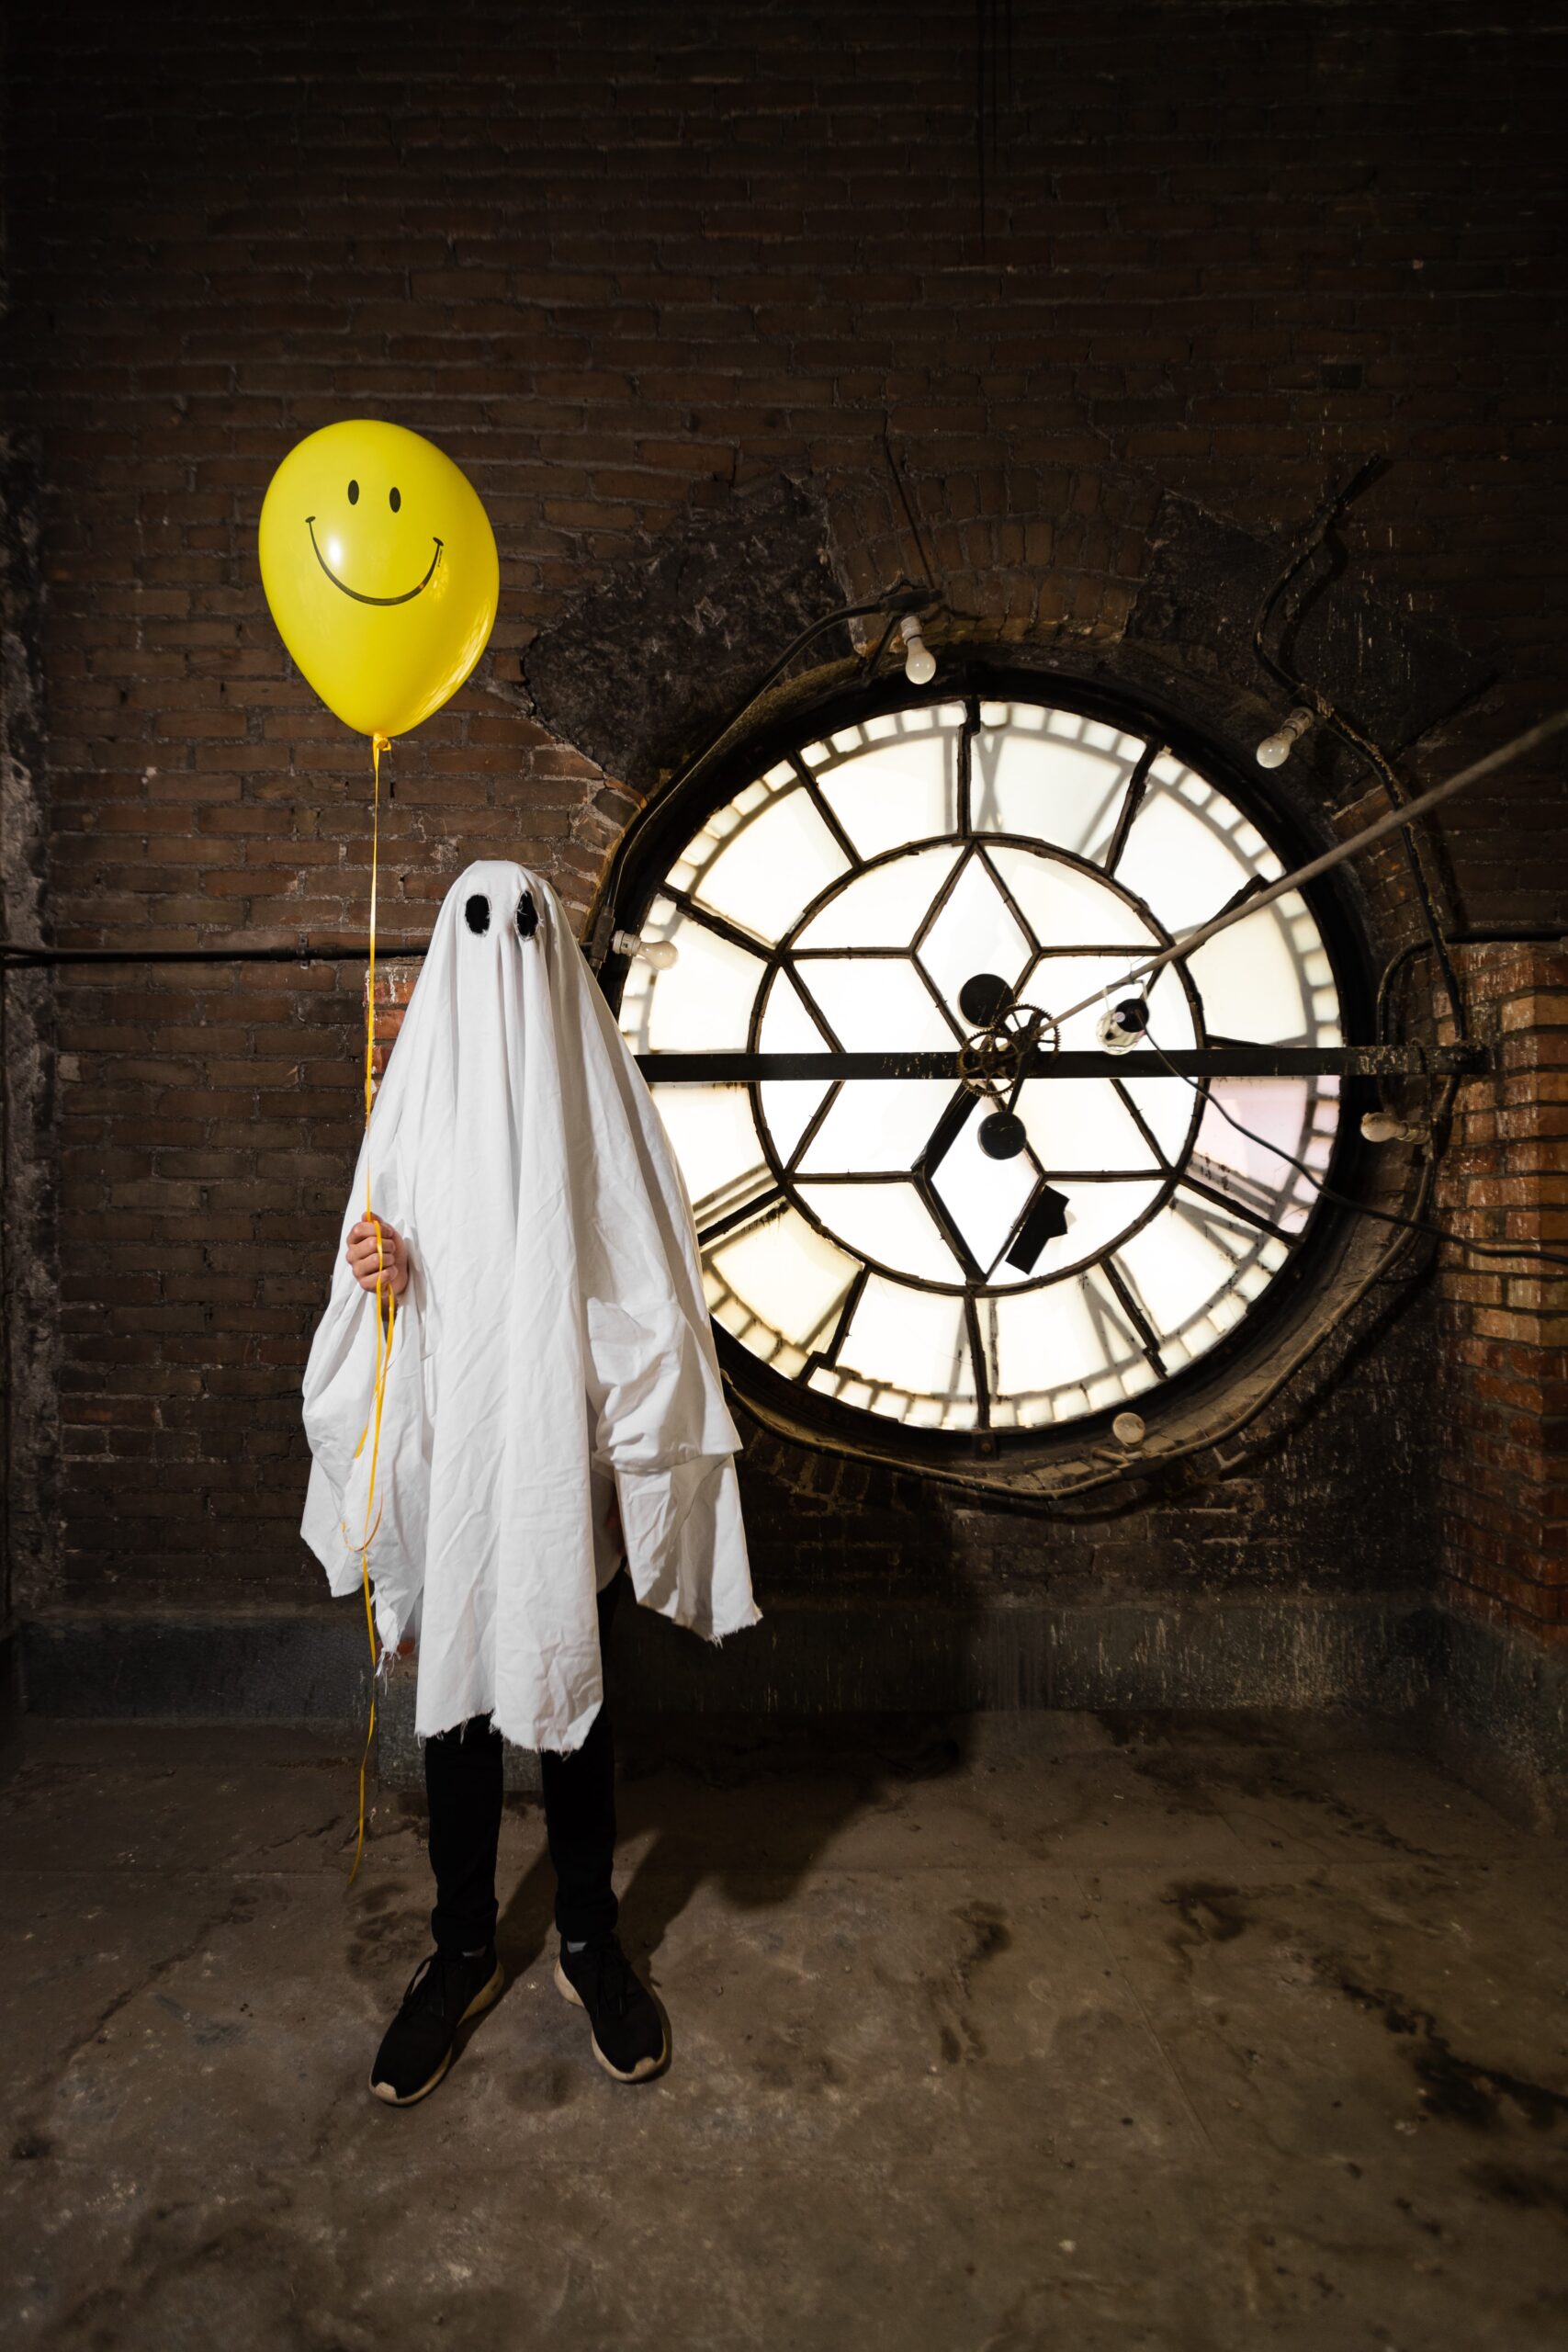 Person in white sheet ghost costume stands in front of large glass clock while holding a yellow balloon with a smiley face